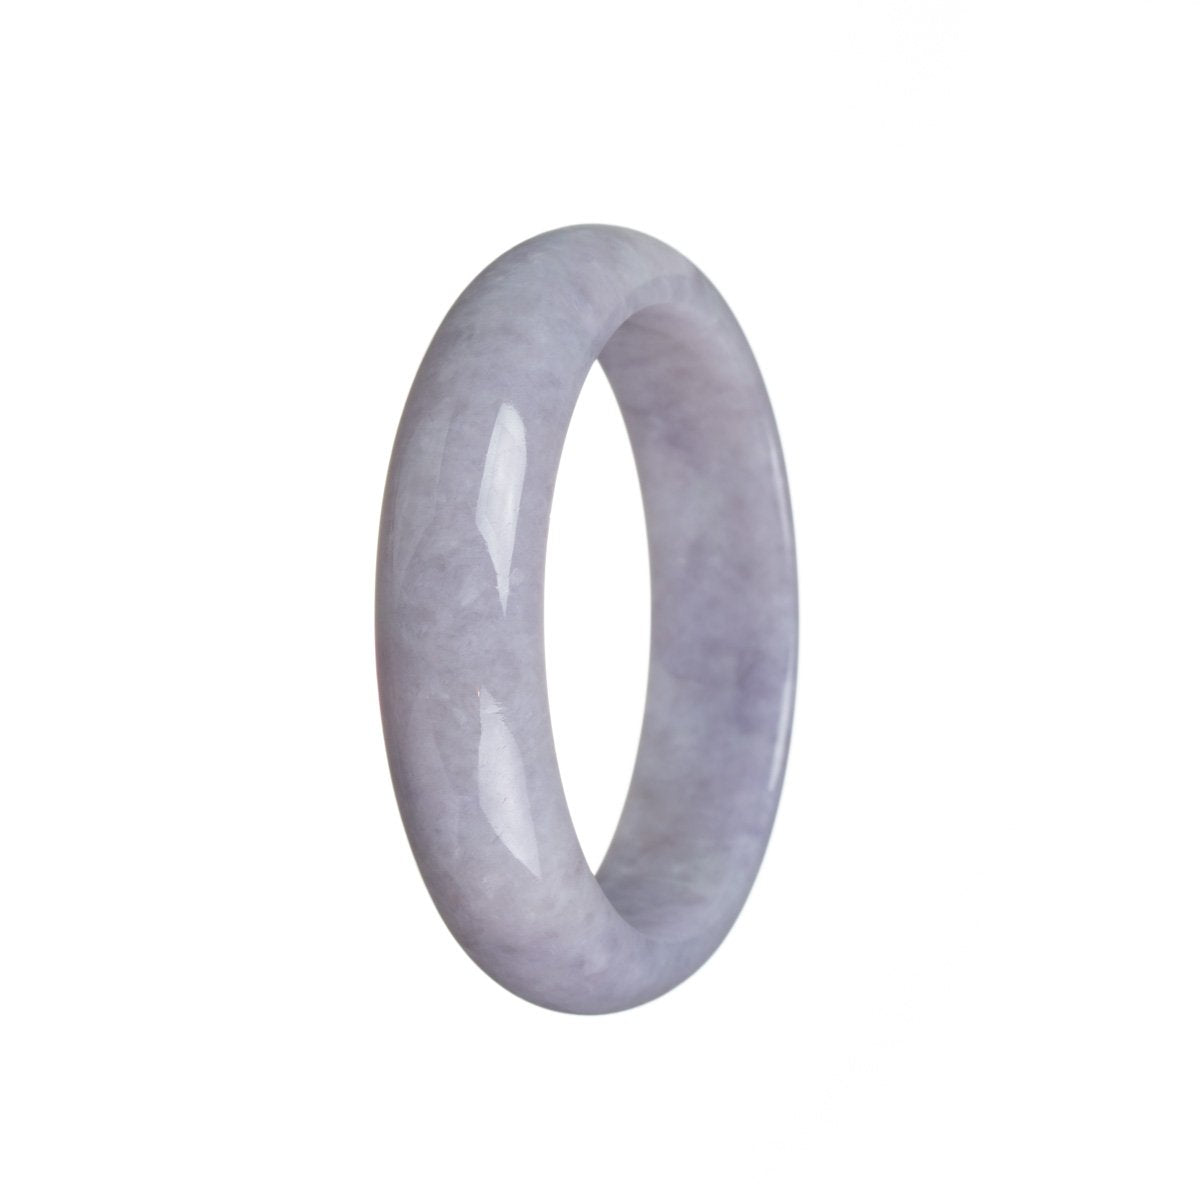 A close-up photo of a delicate lavender jade bracelet, featuring a half-moon shaped centerpiece. The bracelet is made of high-quality, Grade A lavender jade, exuding a calming and elegant vibe.